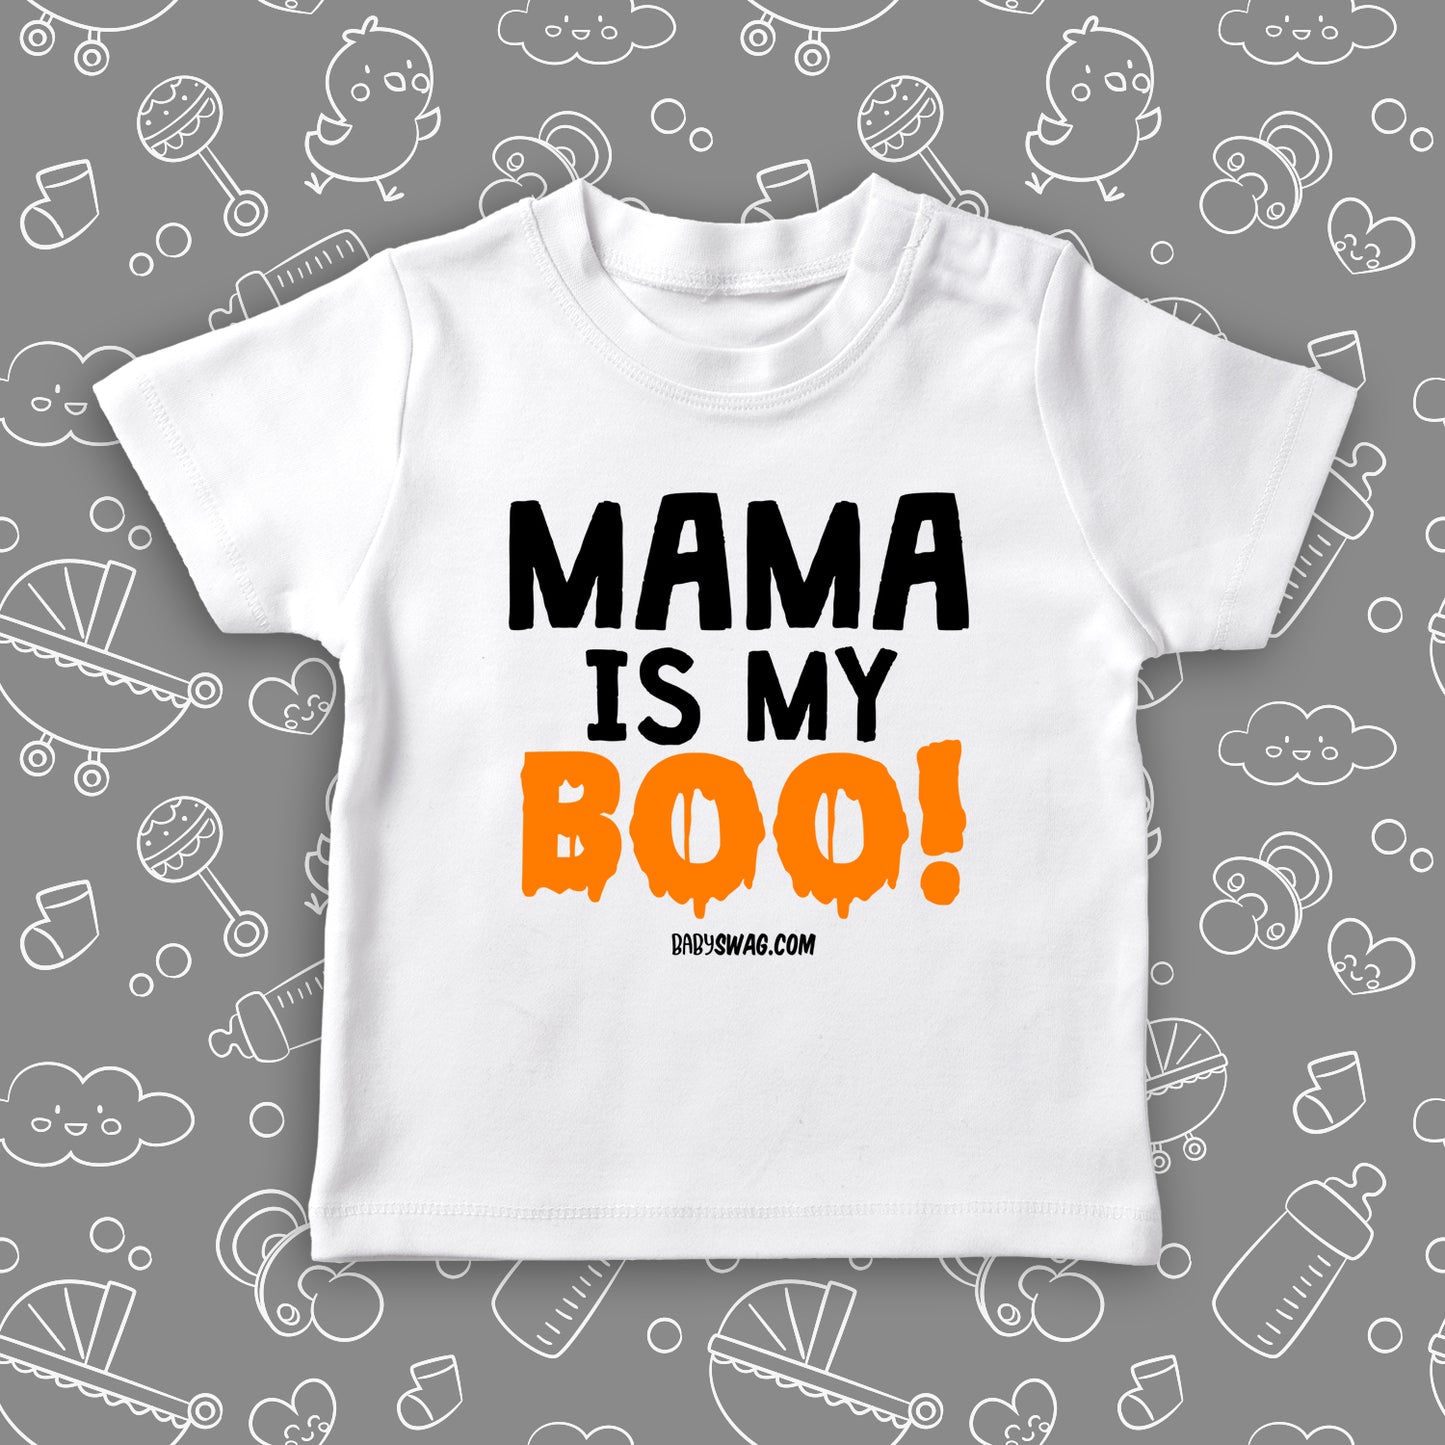 Mama Is My Boo! (T)